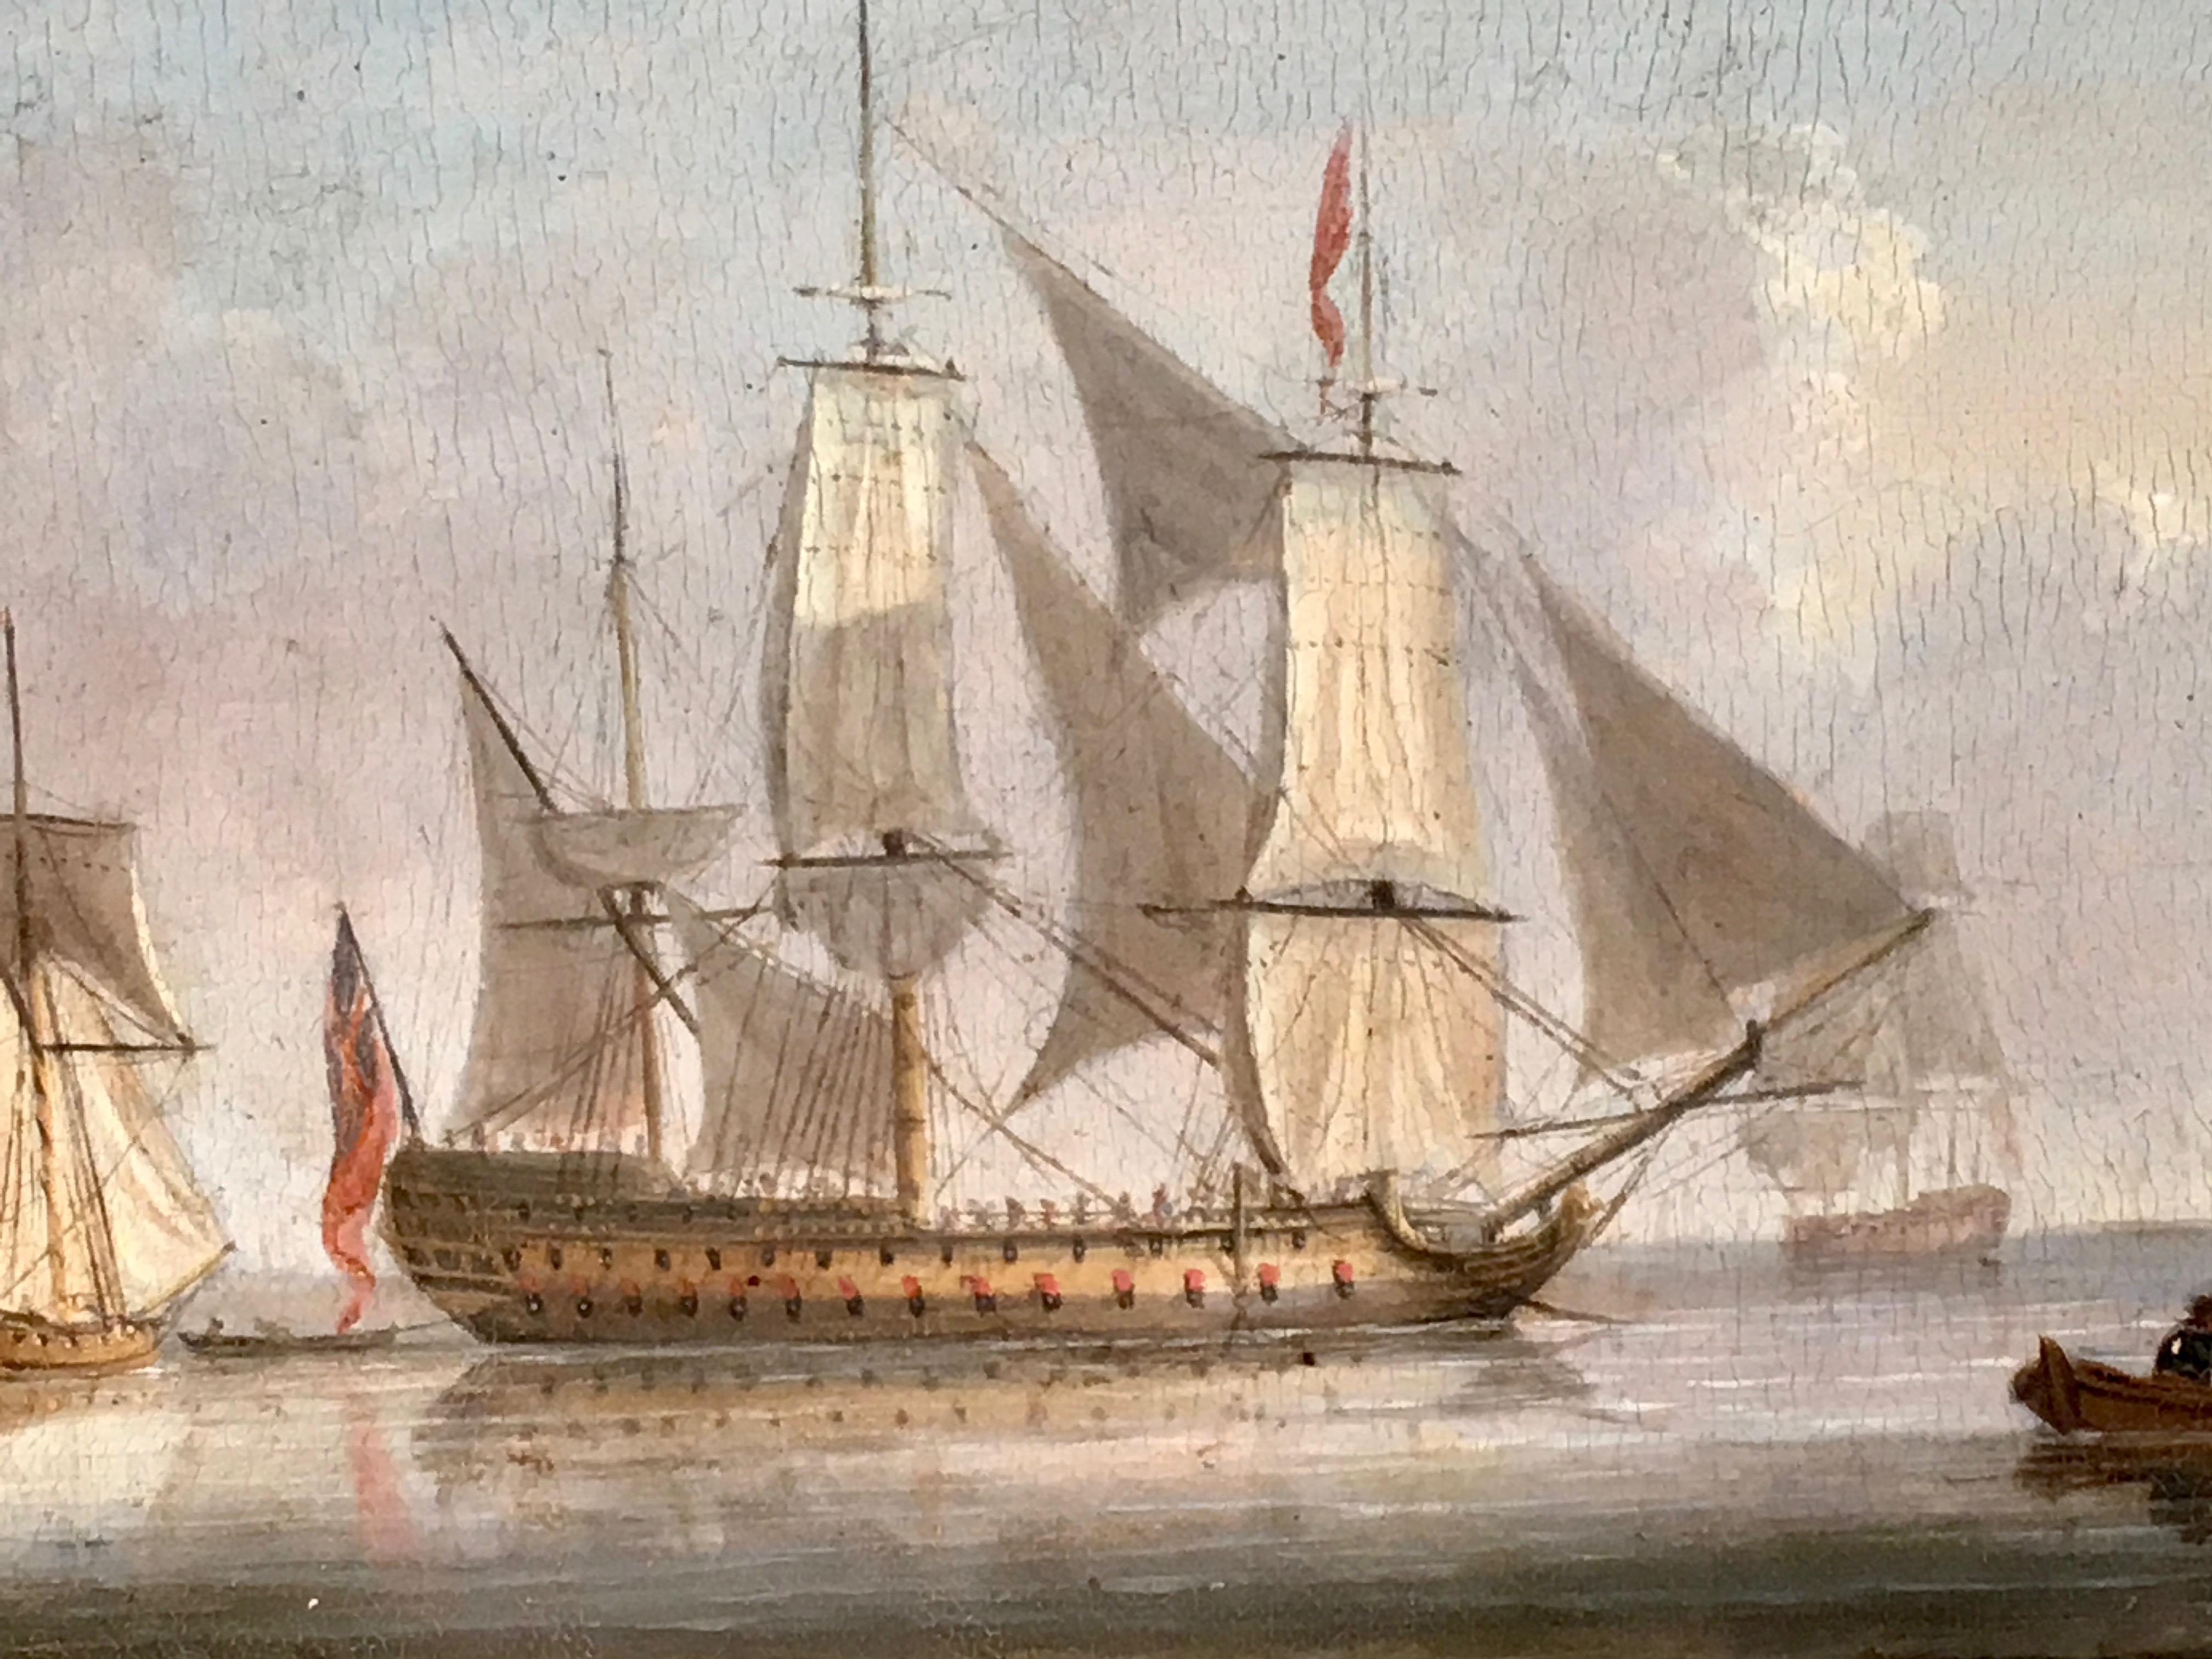 Early 19th century Georgian or Regency English warship off the English coast   - Old Masters Painting by Thomas Luny